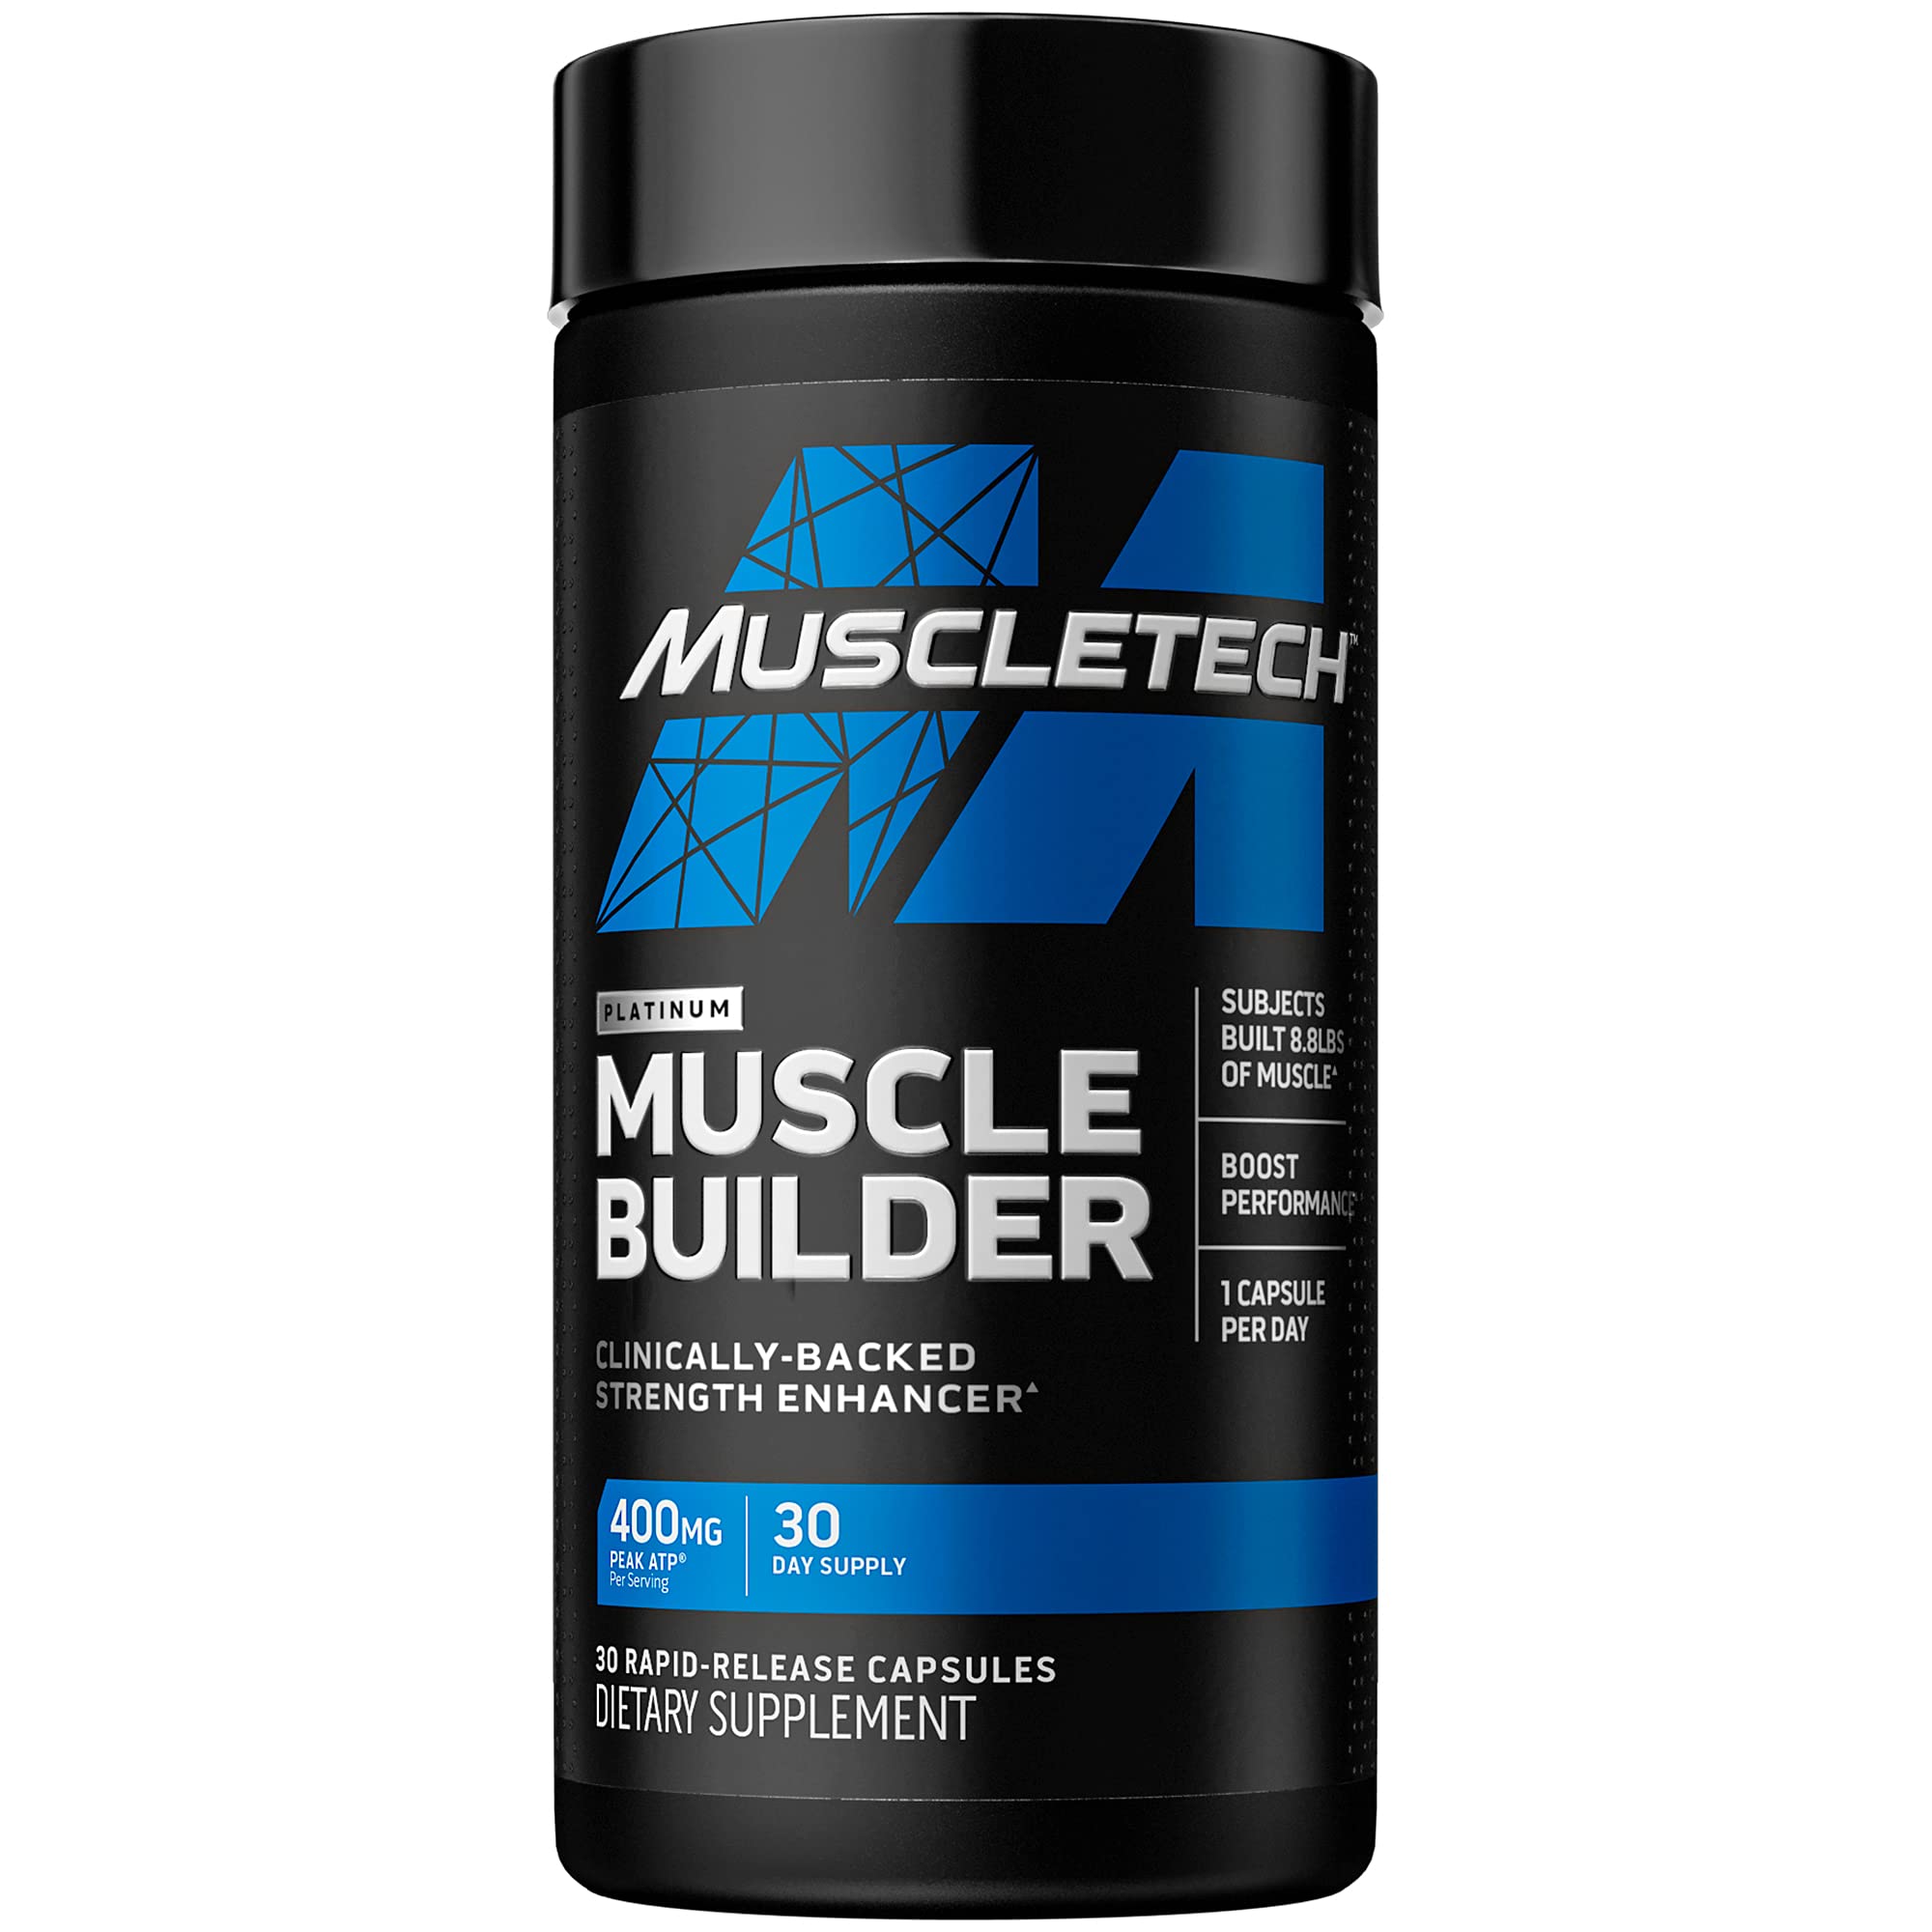 MuscleTech Muscle Builder Muscle Building Supplements for Men & Women Nitric Oxide Booster Muscle Gainer Workout Supplement 400mg of Peak ATP for Enhanced Strength, 30 Pills